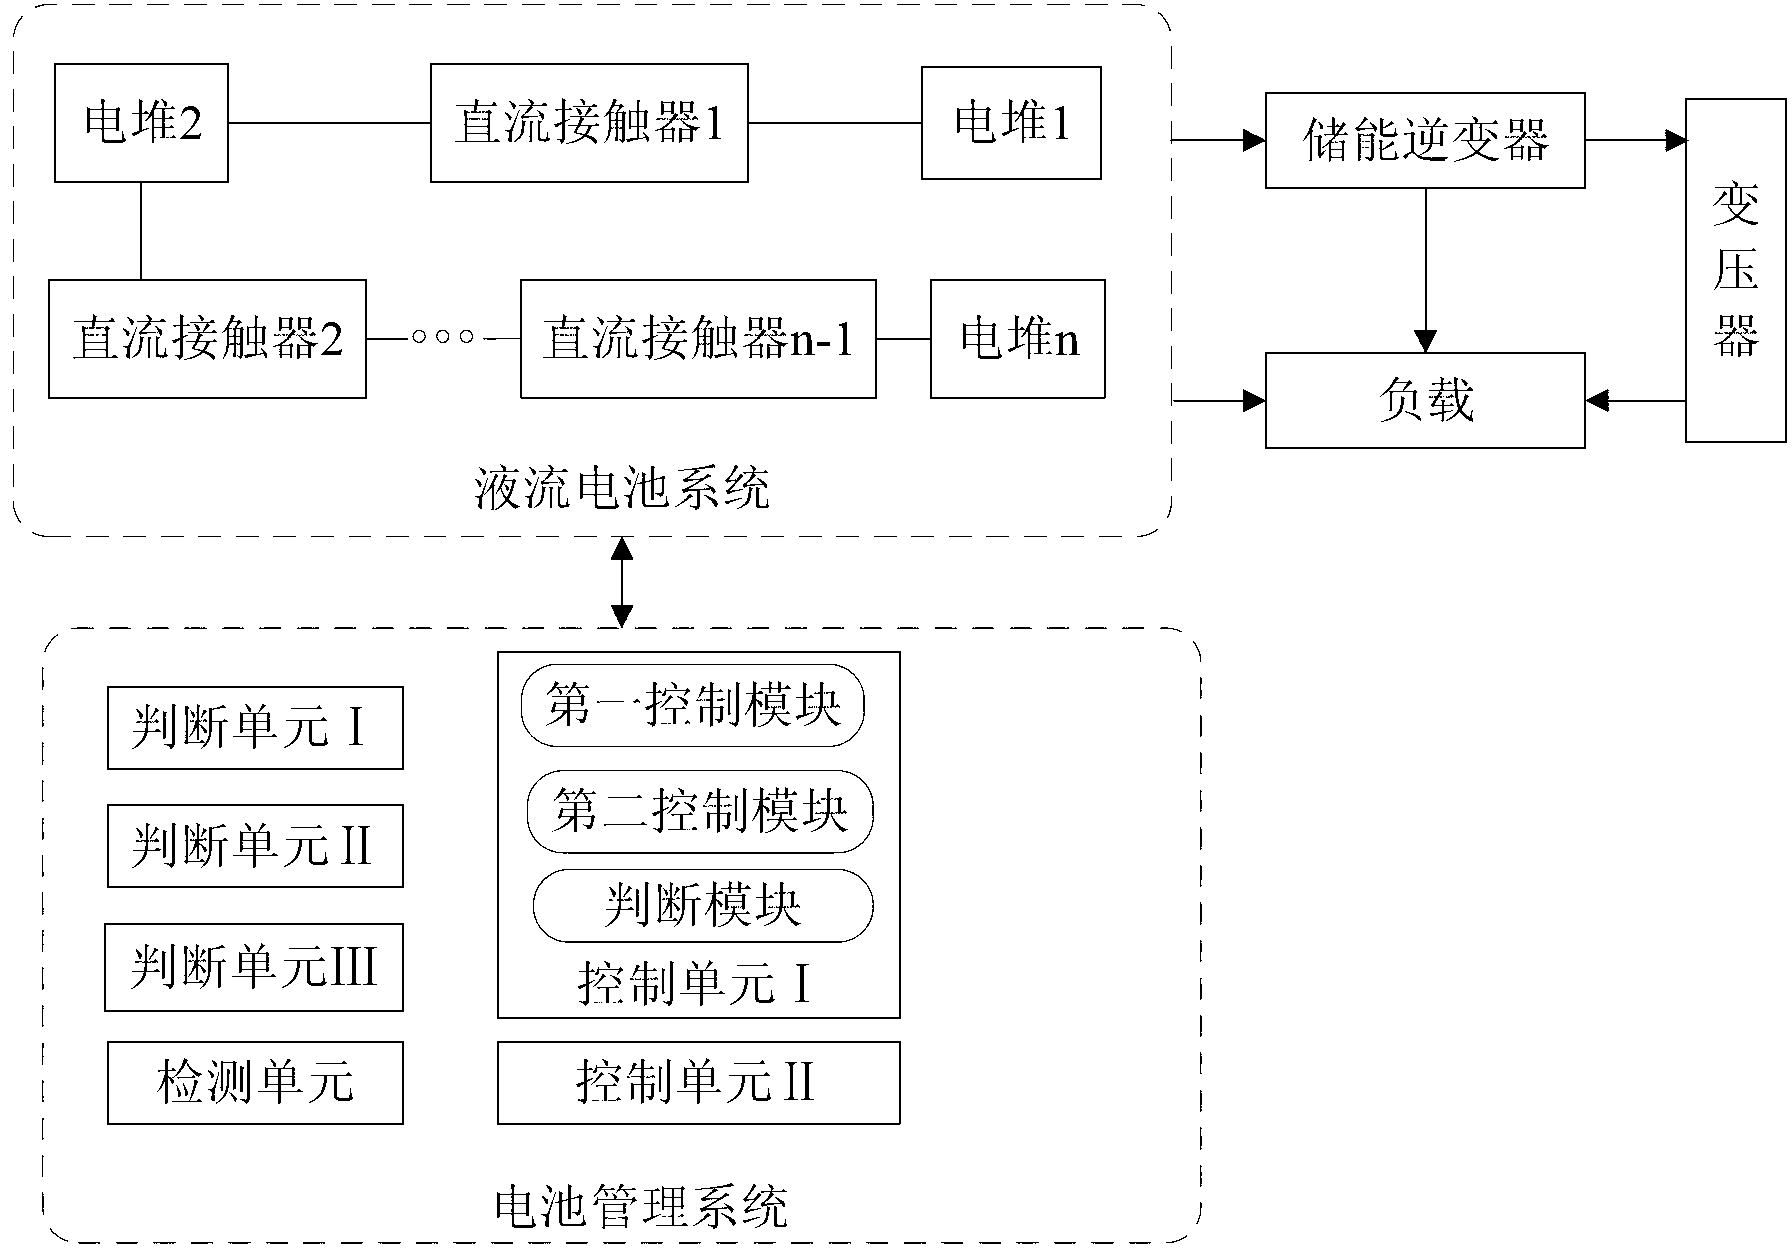 Leakage protection method and system of redox flow cell system as well as redox flow cell system